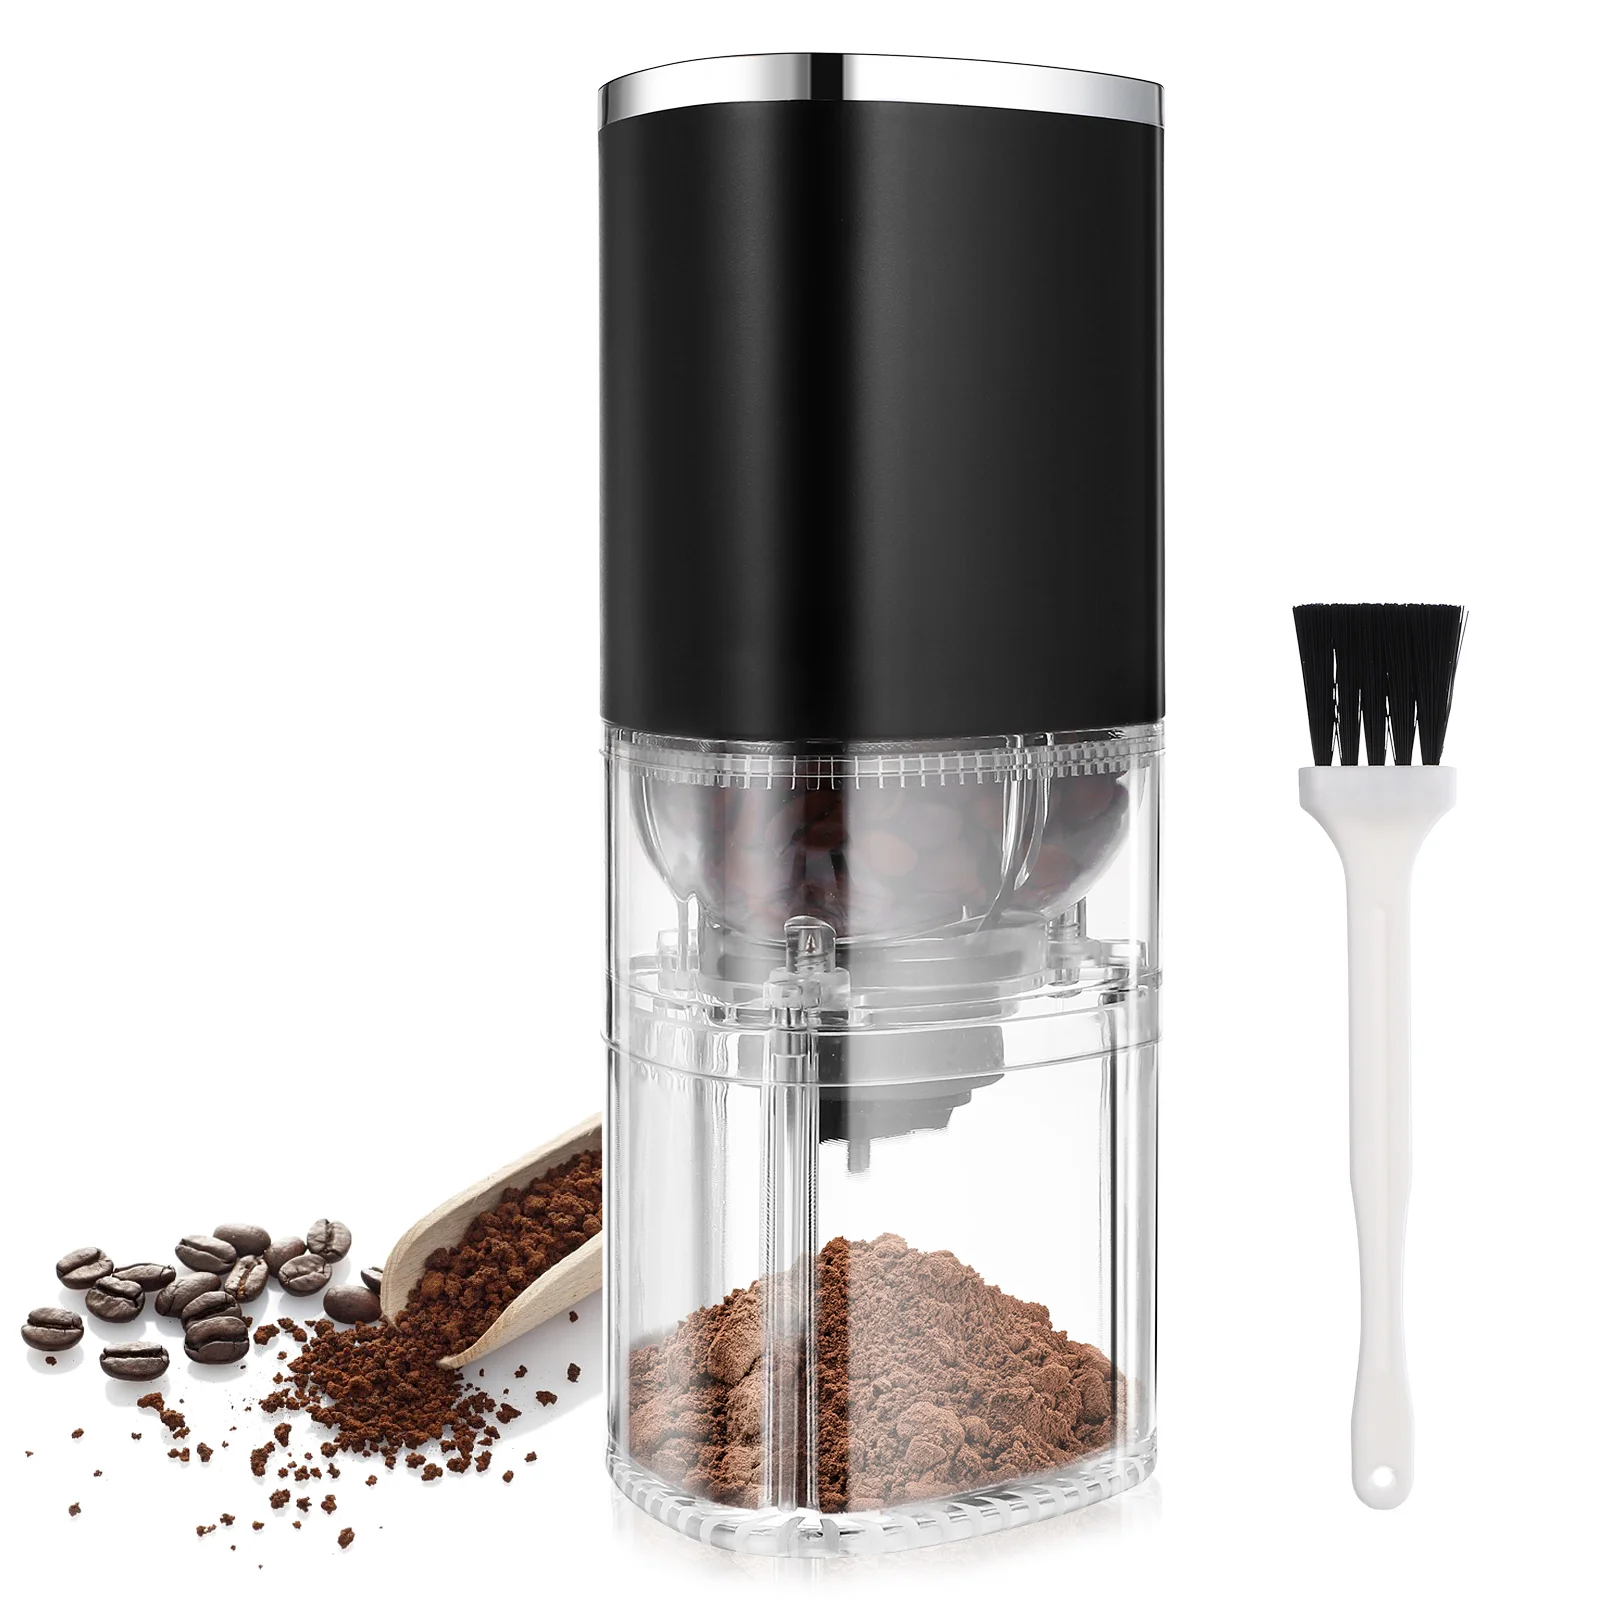 

Grinder Coffee Machine Espresso Conical Burr Grinders Beans Grinding Maker Electric Manual